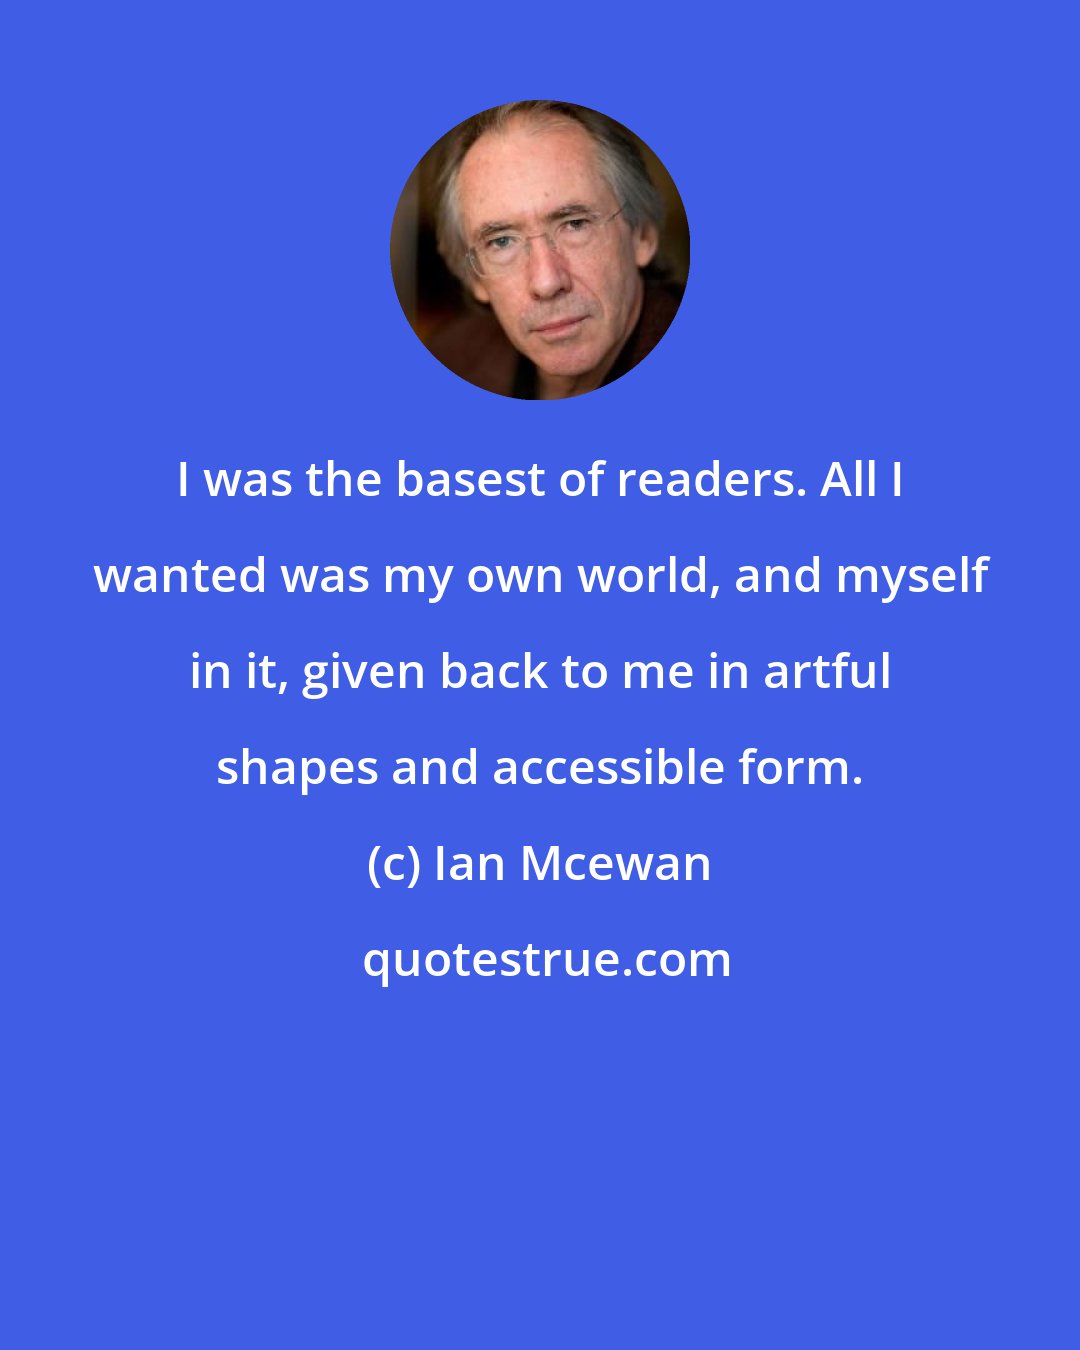 Ian Mcewan: I was the basest of readers. All I wanted was my own world, and myself in it, given back to me in artful shapes and accessible form.